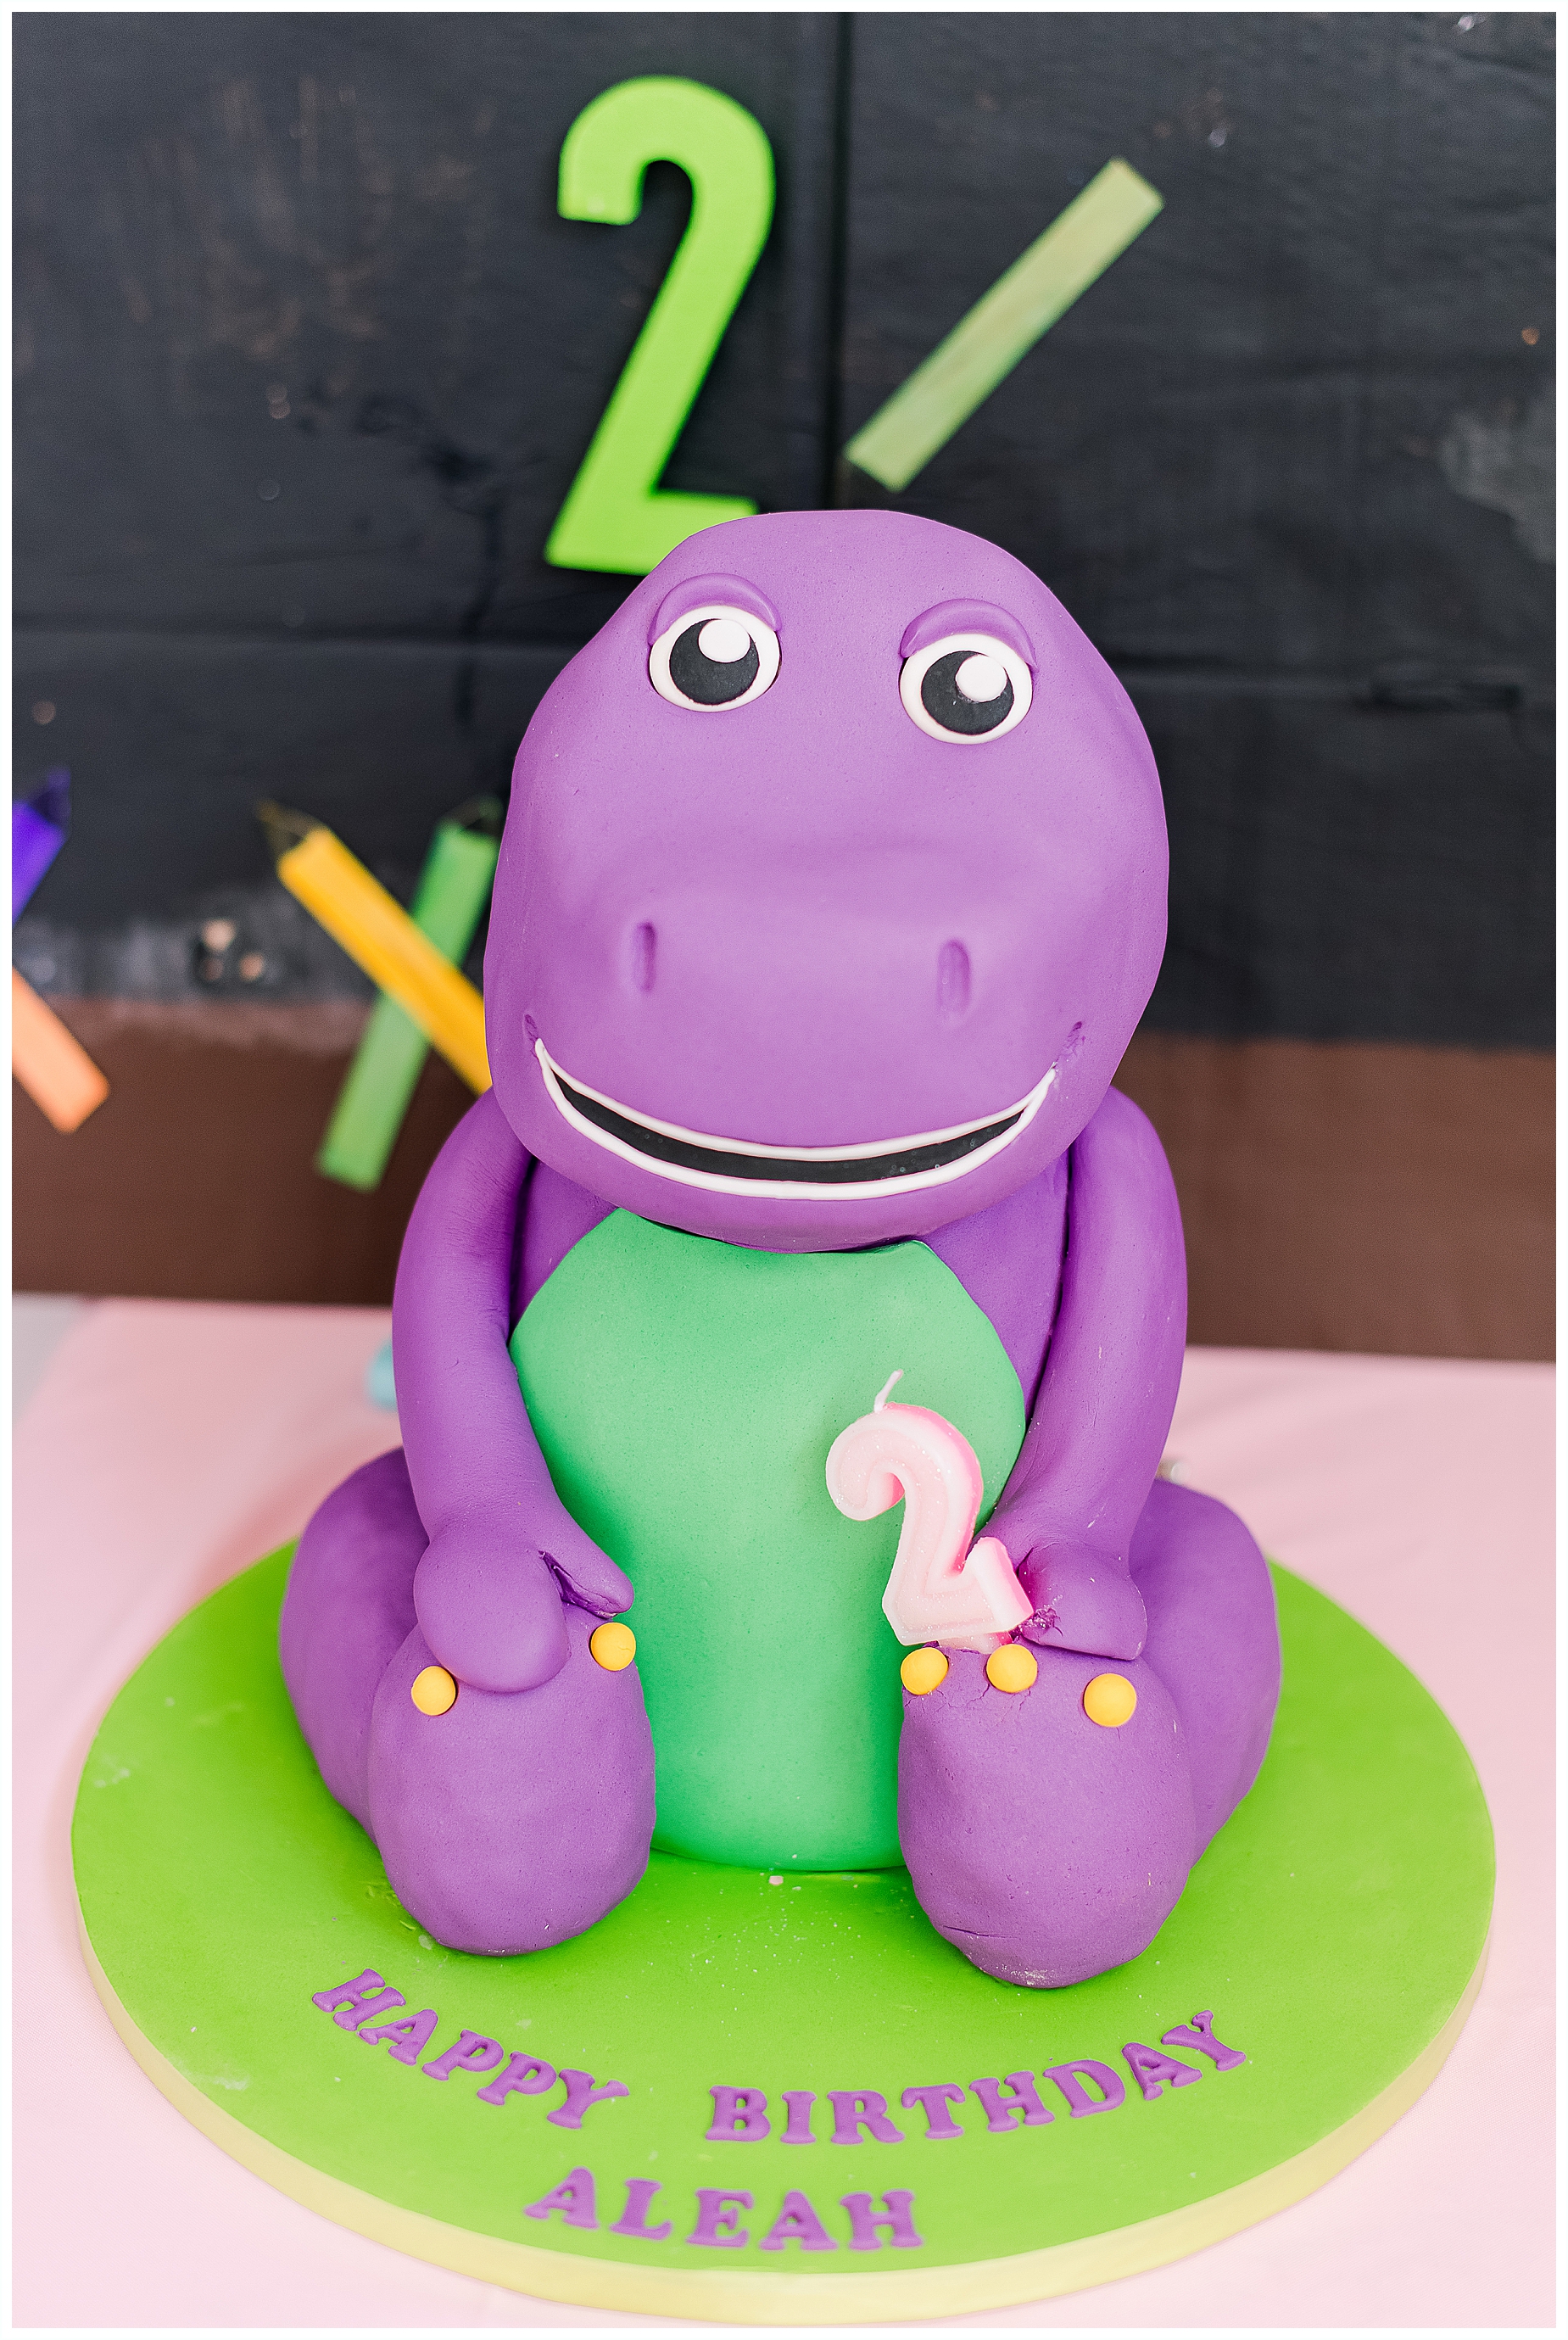 Purple and green Barney themed cake